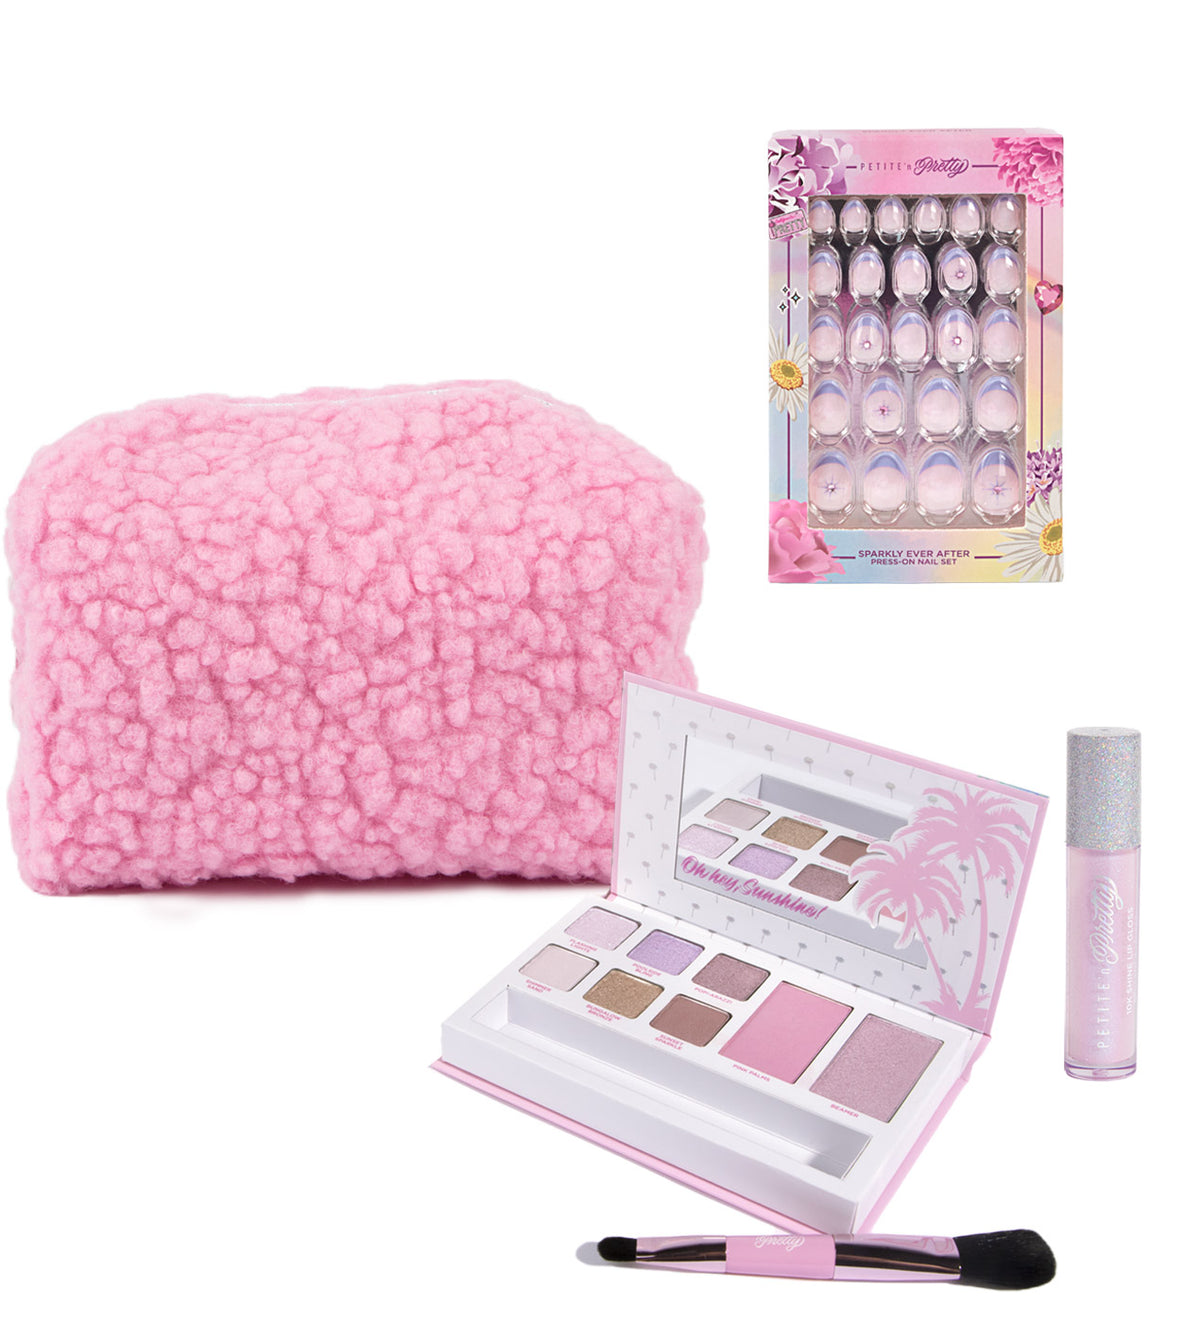 Buy Fashion Colour Professional And Home 4 IN 1 Makeup Kit With 15  Glamorous Eyeshadow, 3 Glossy Lip Gloss, 1 Powder Cake and 1 Blusher FC2022  (Shade 01) Online in India | Pixies